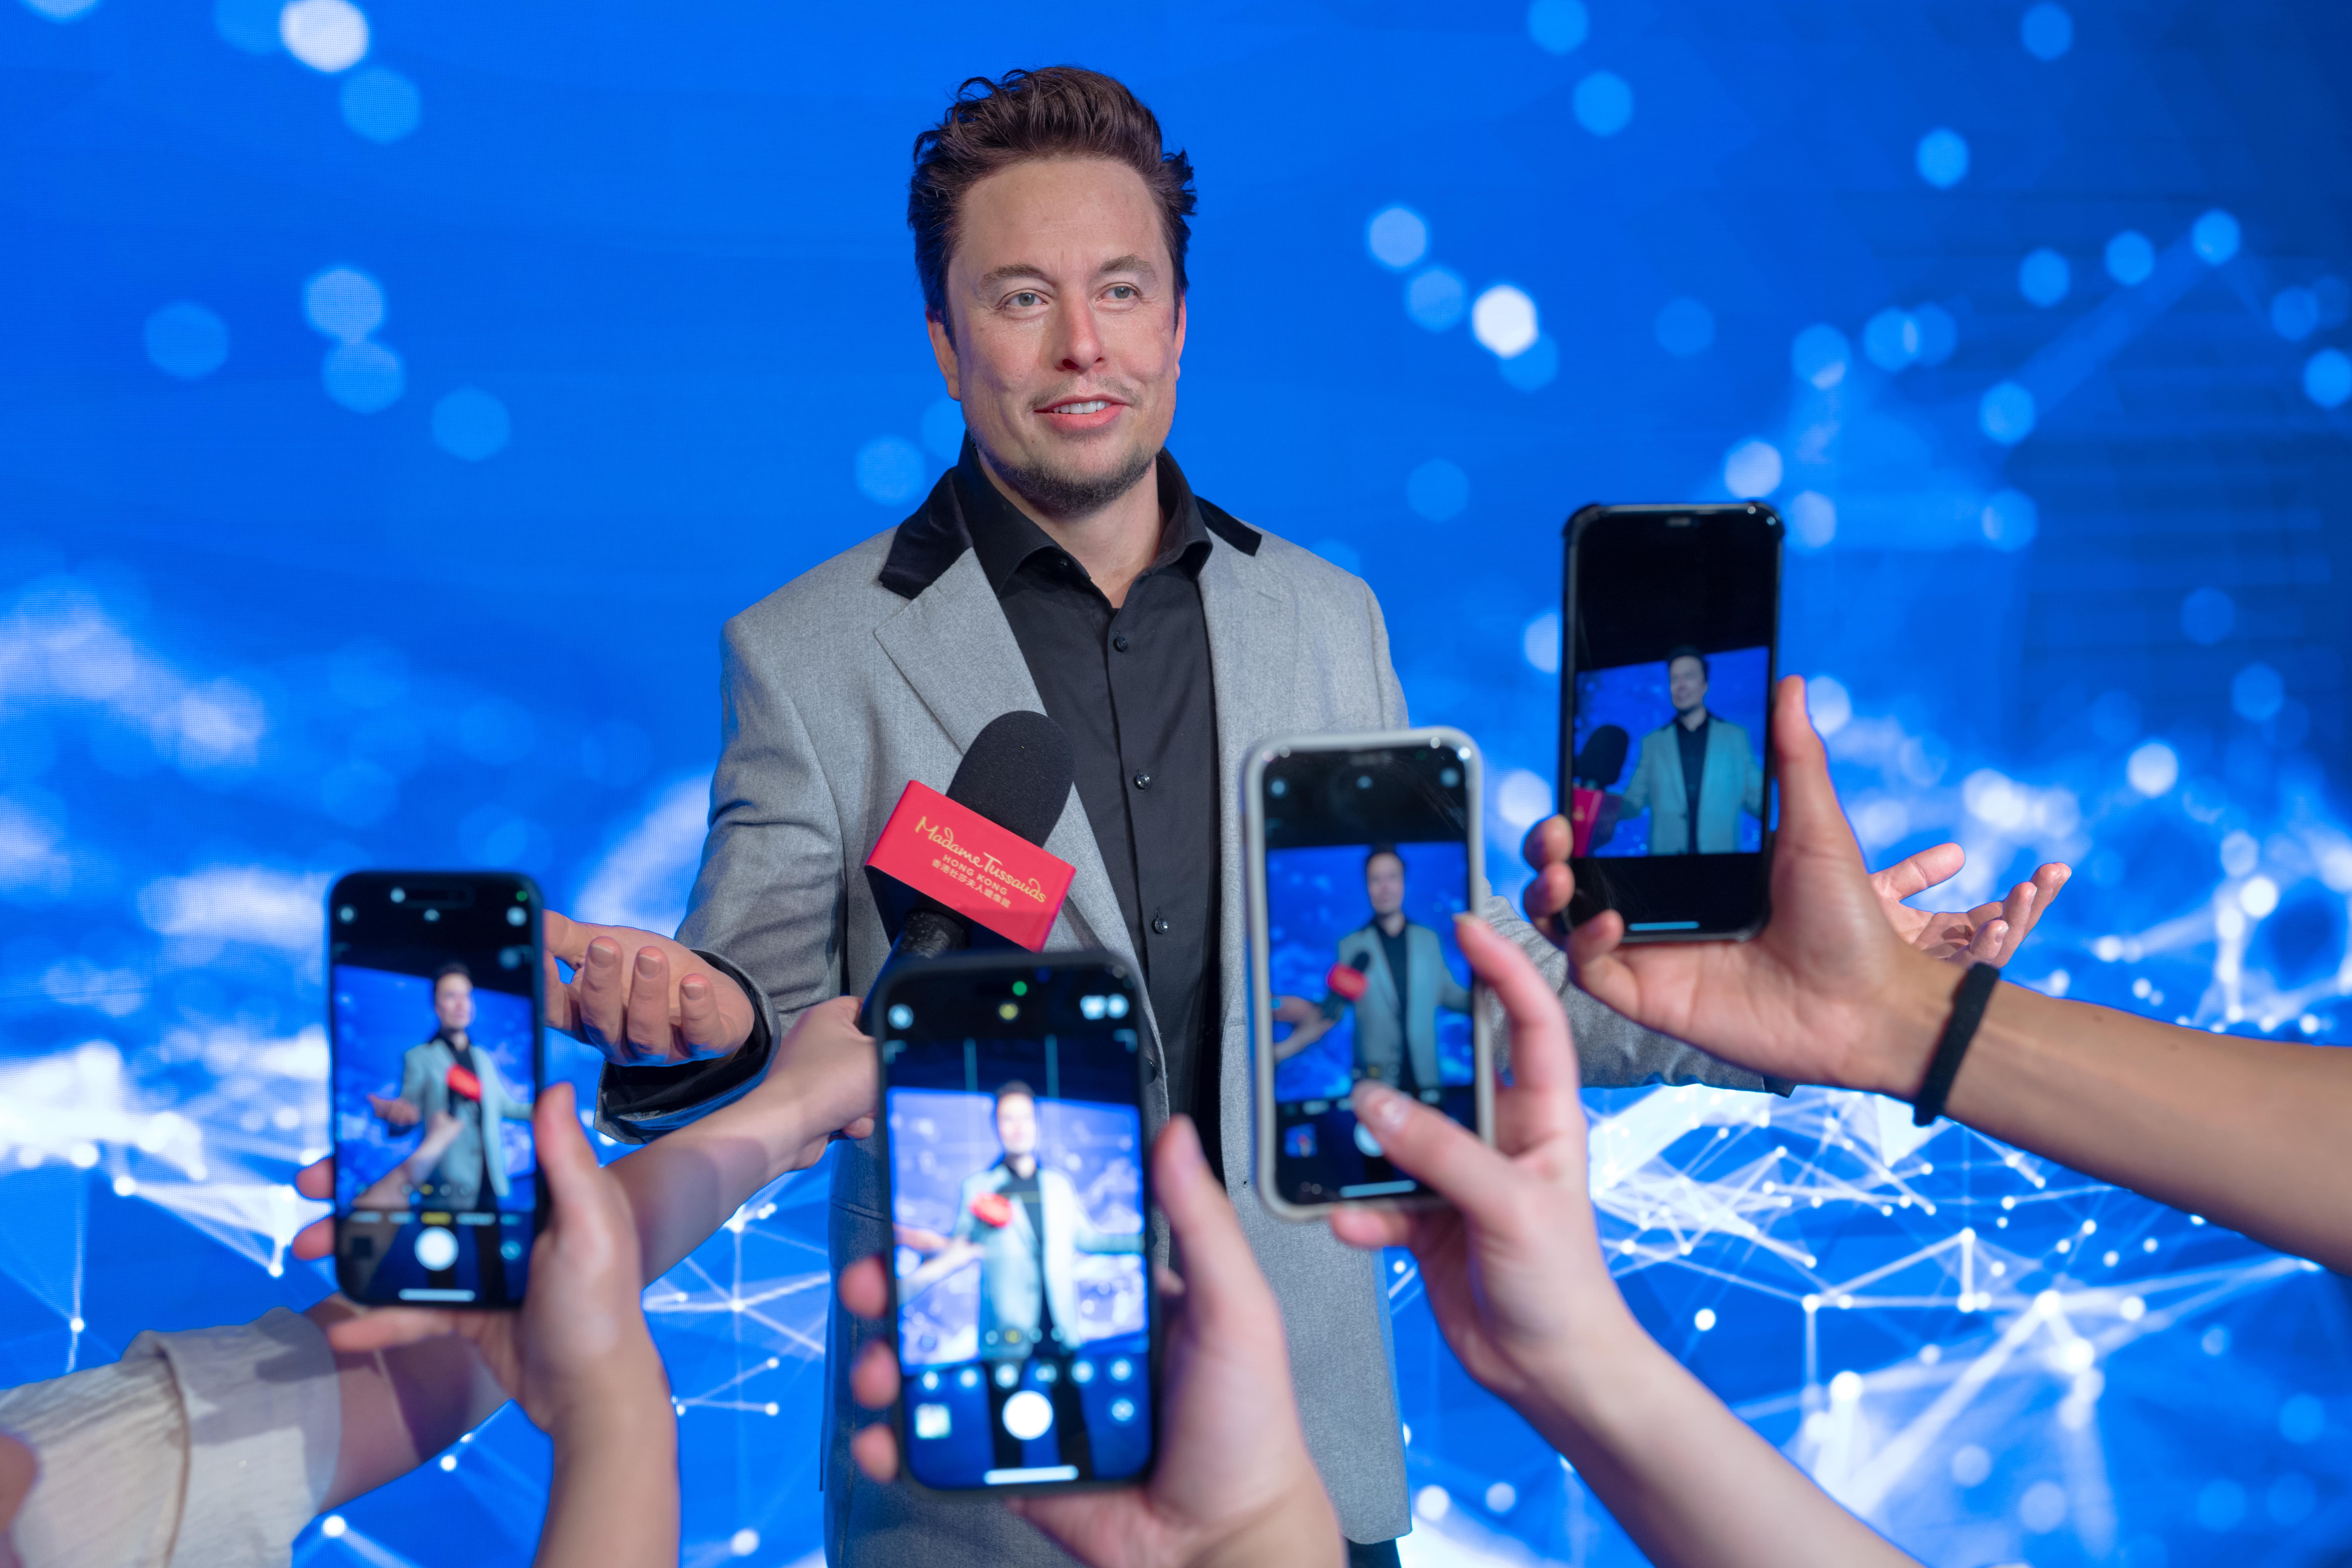 World's First Wax Figure of Elon Musk Unveiled in Hong Kong Partnered with Peak Tram to present “Morning Combo” to meet renowned entrepreneurs